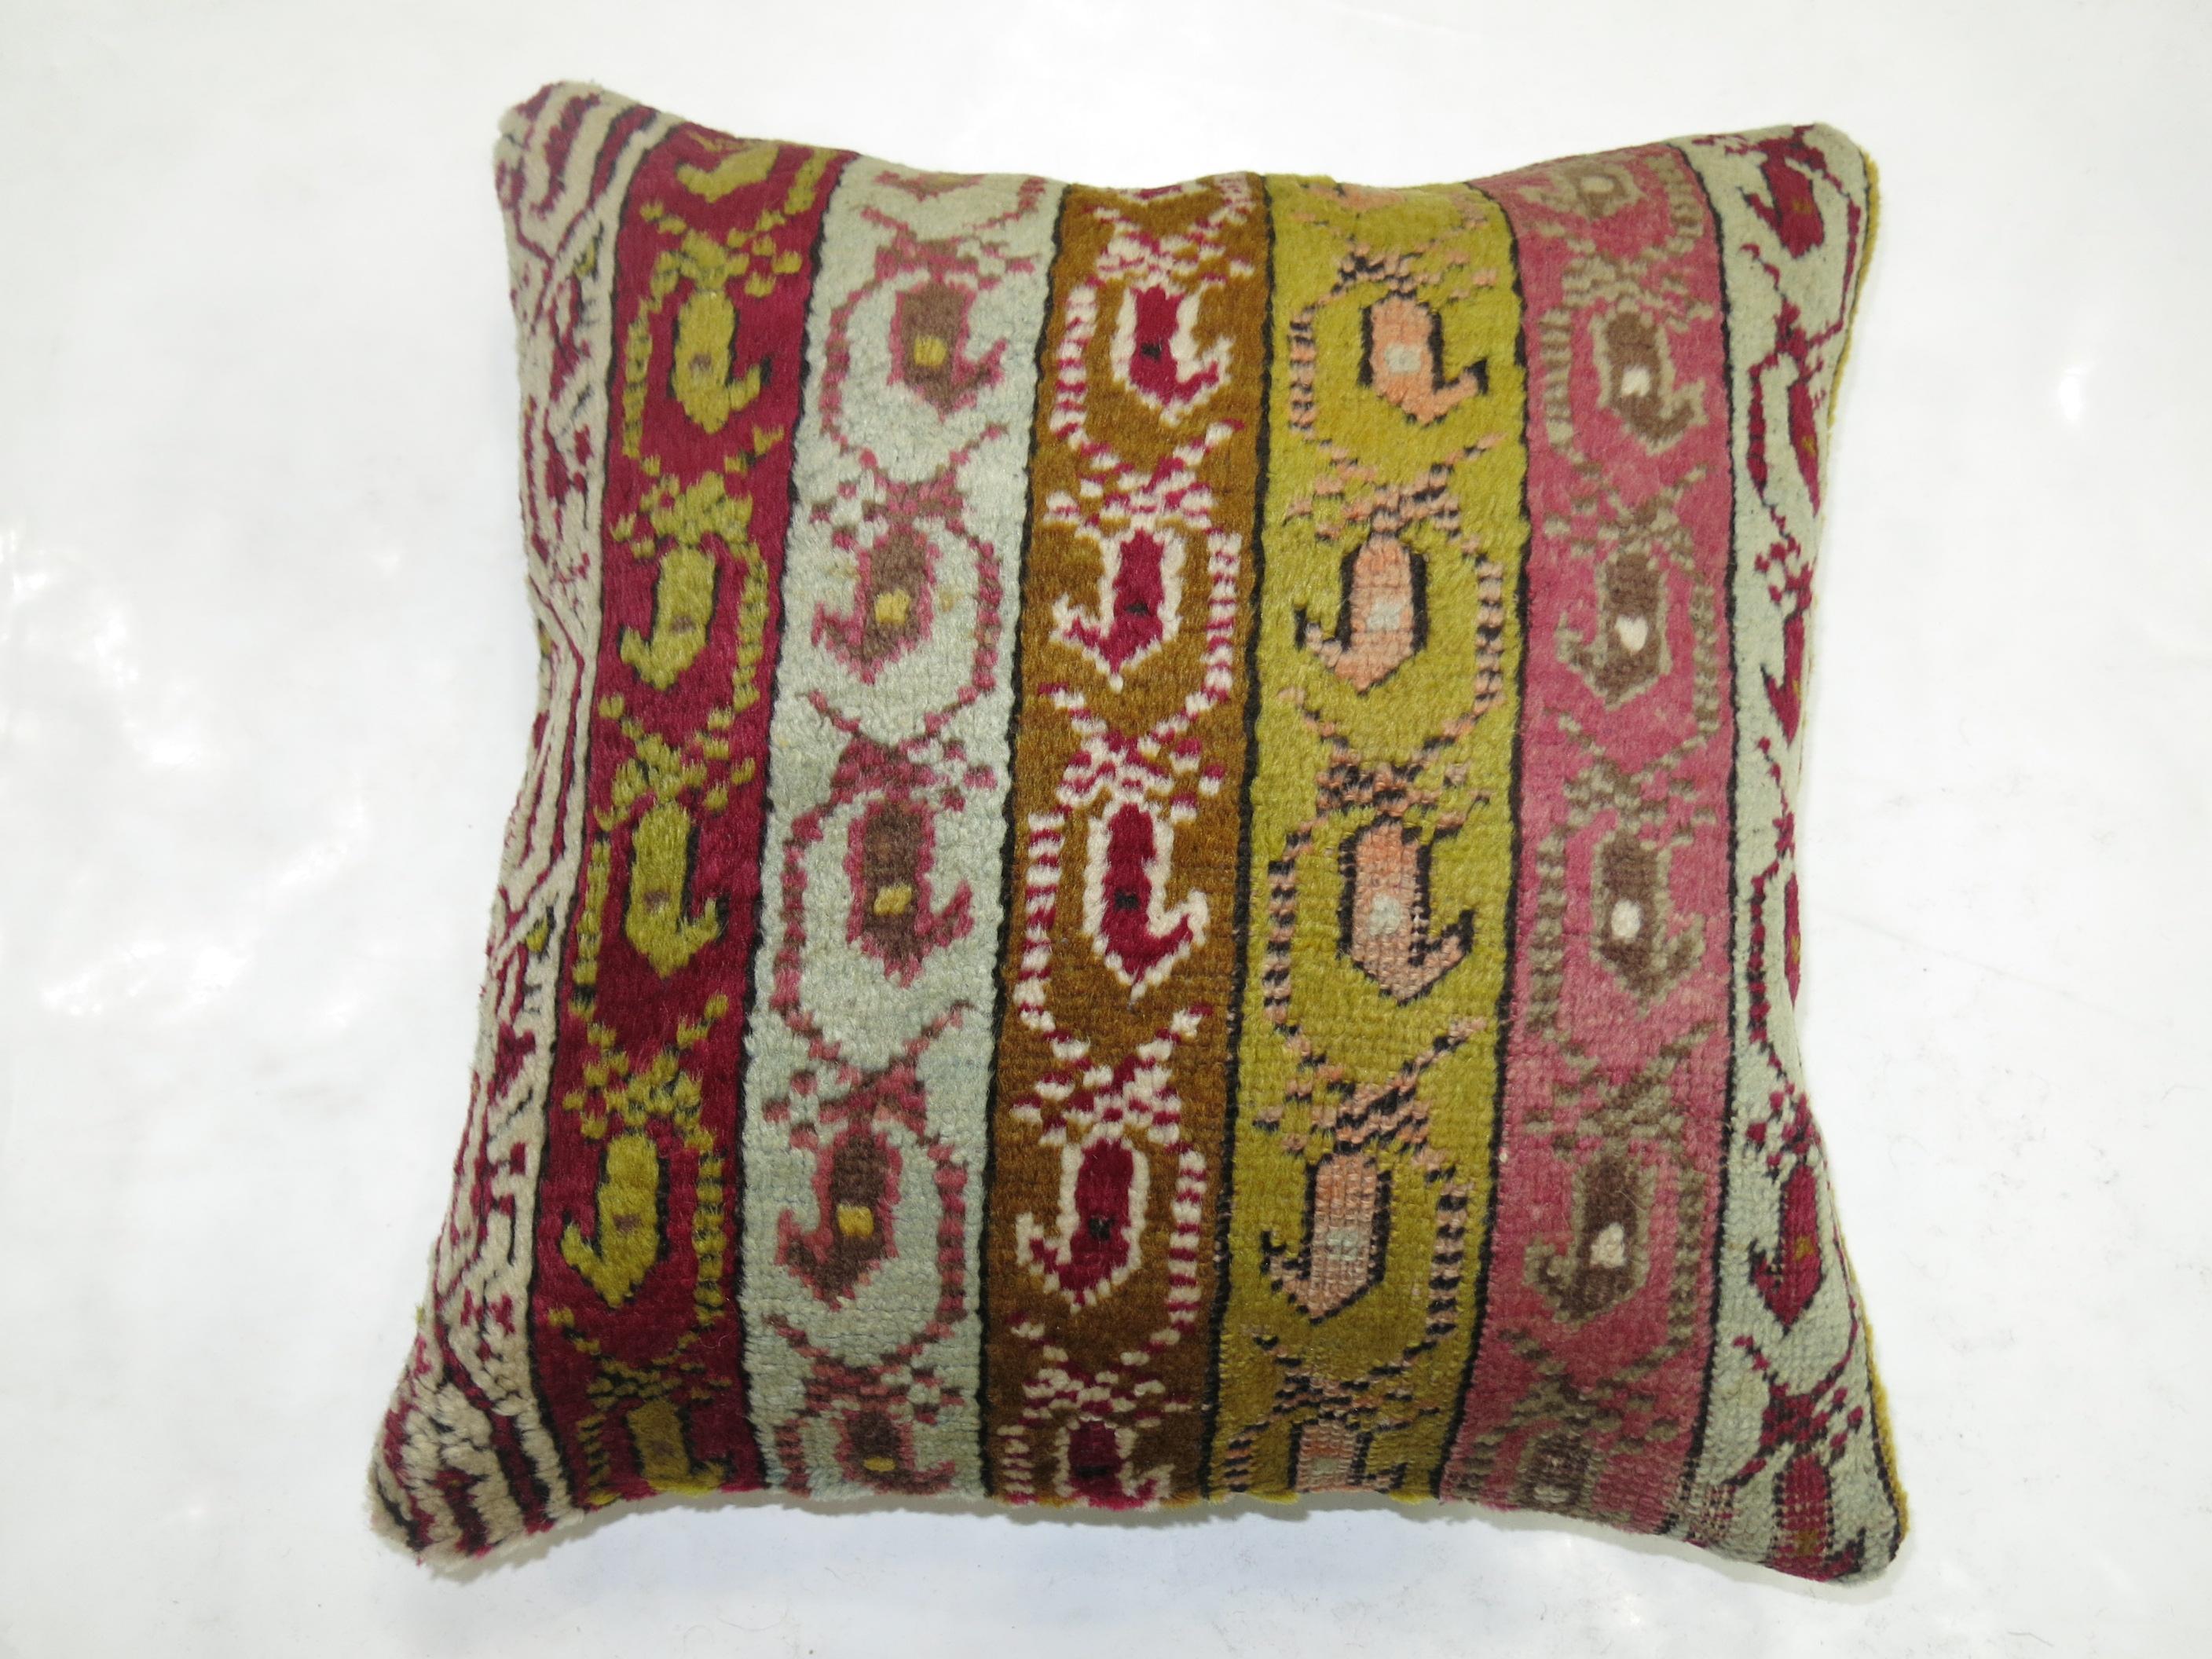 Pillow made from an early 20th century Turkish ghiordes rug.